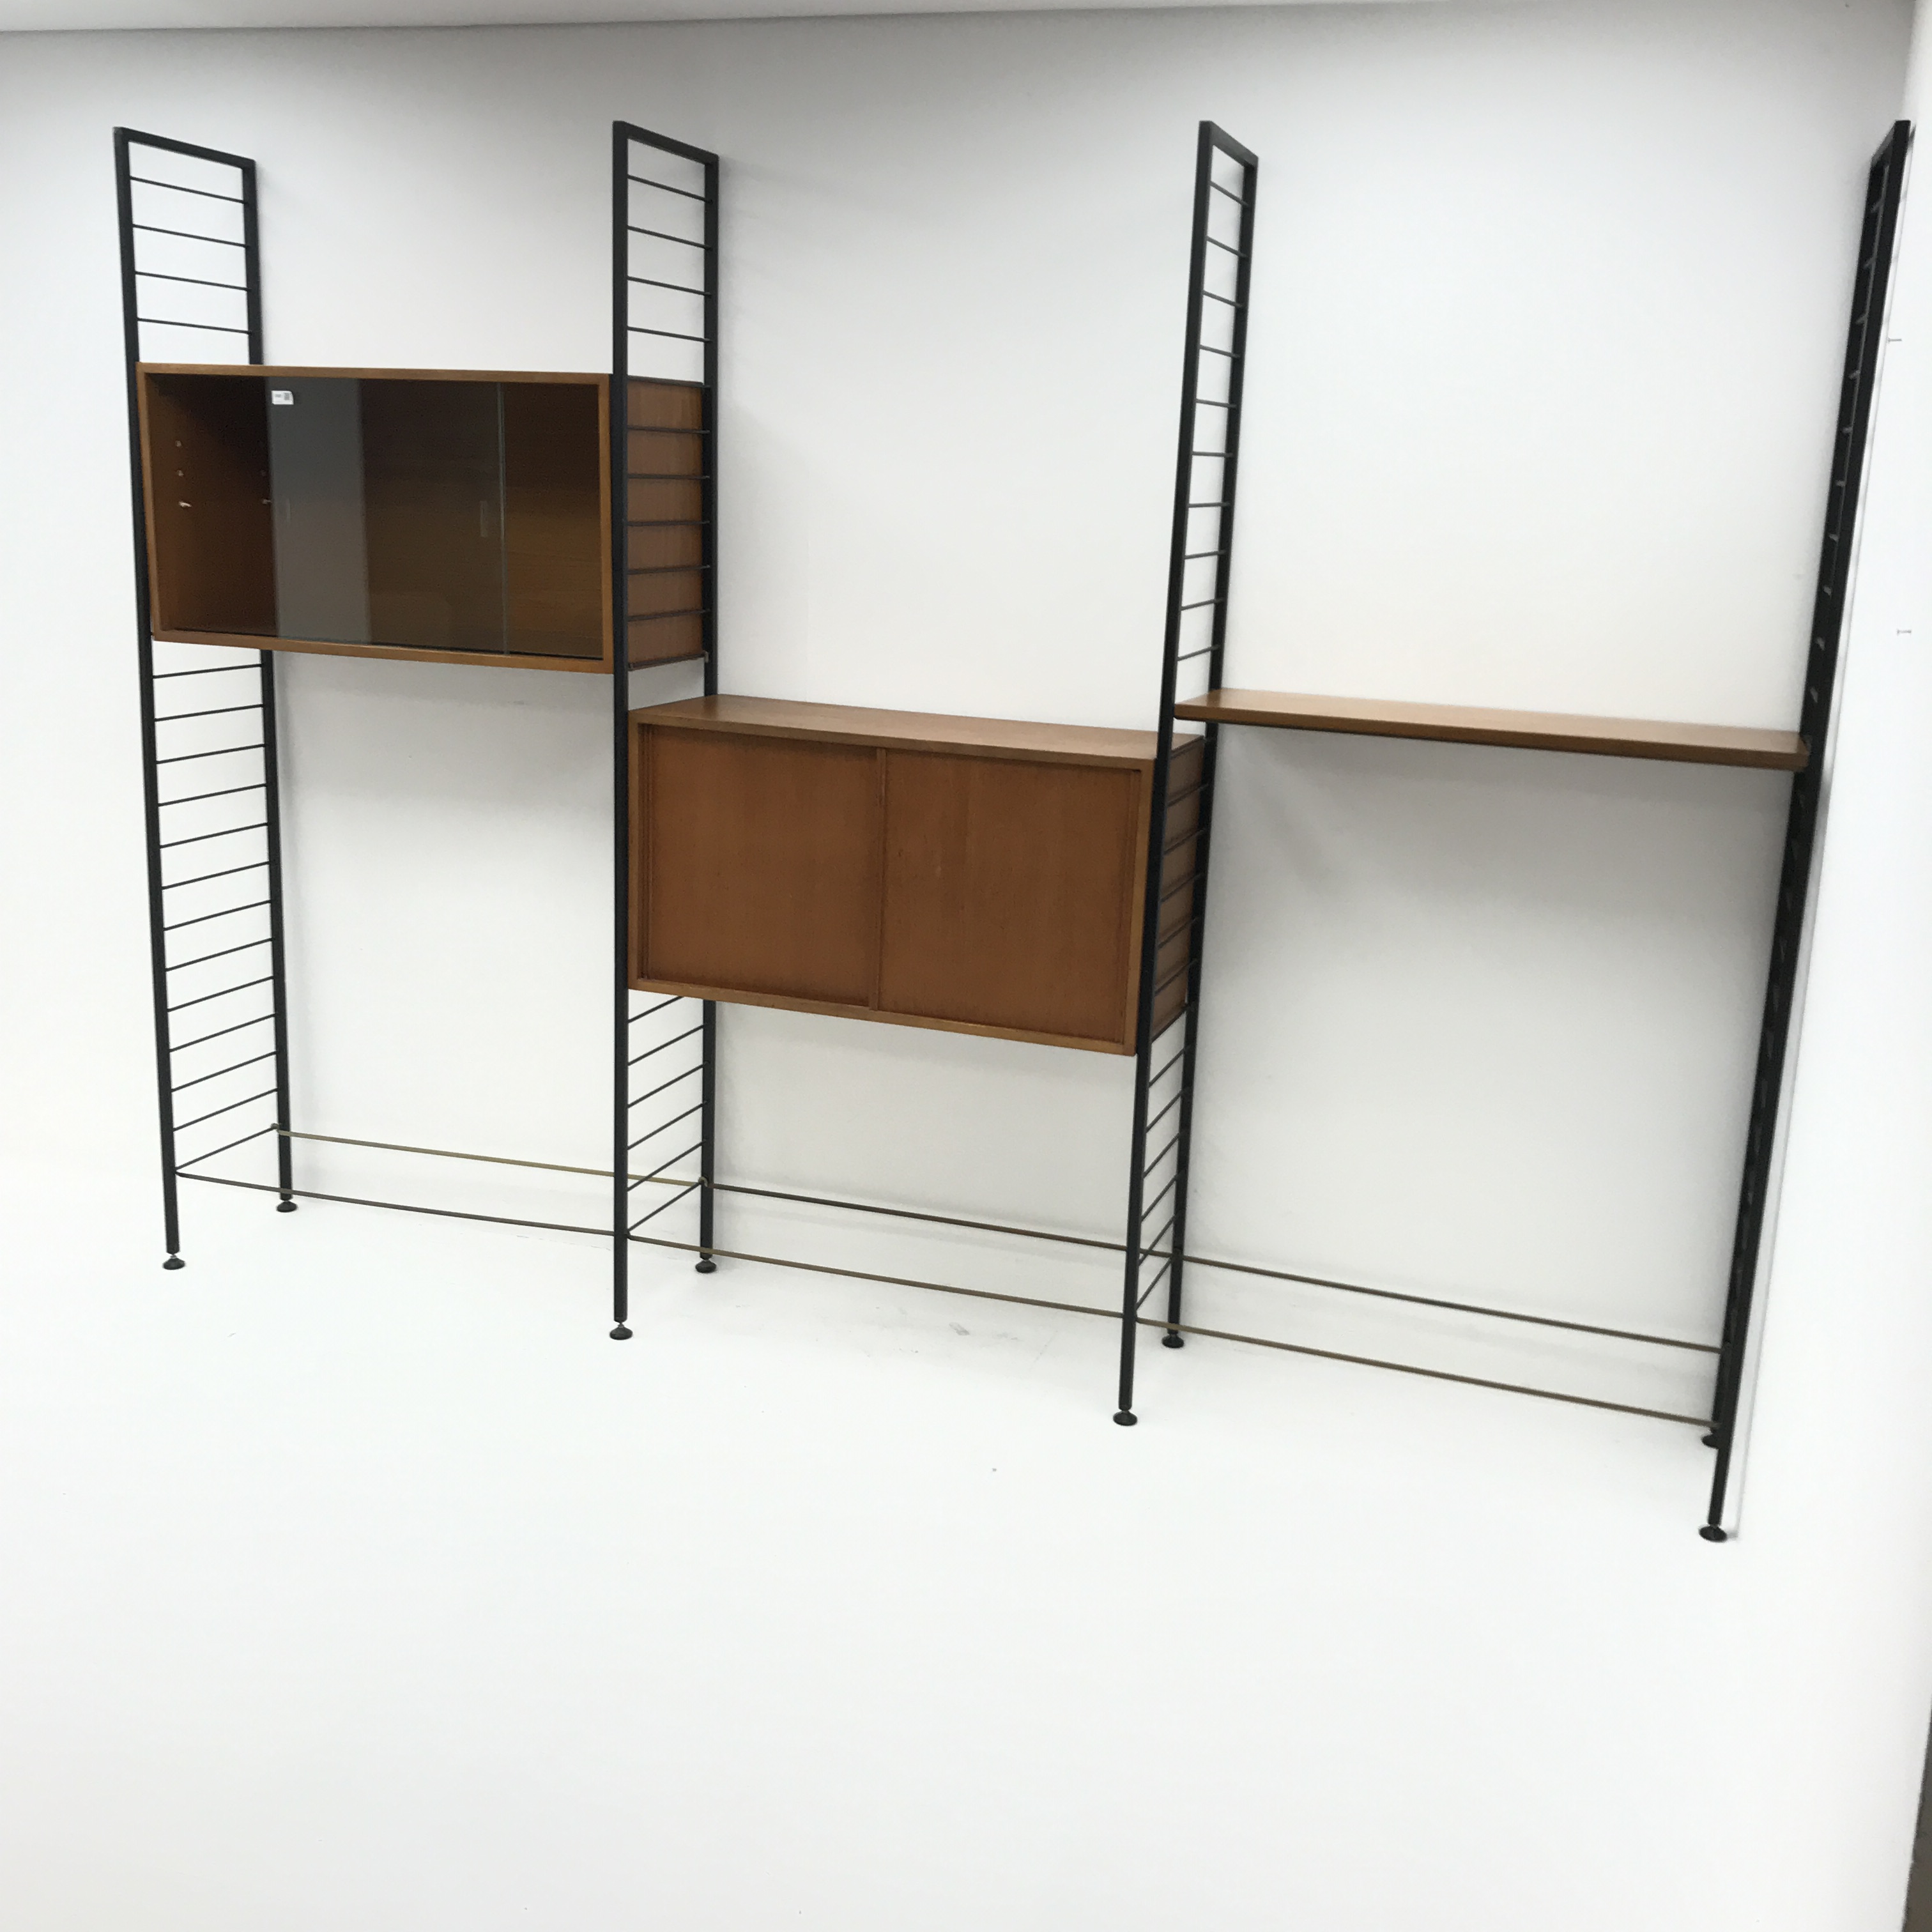 Staples Ladderax three bay sectional wall unit, two teak units comprising of solid and glazed slidin - Image 16 of 16